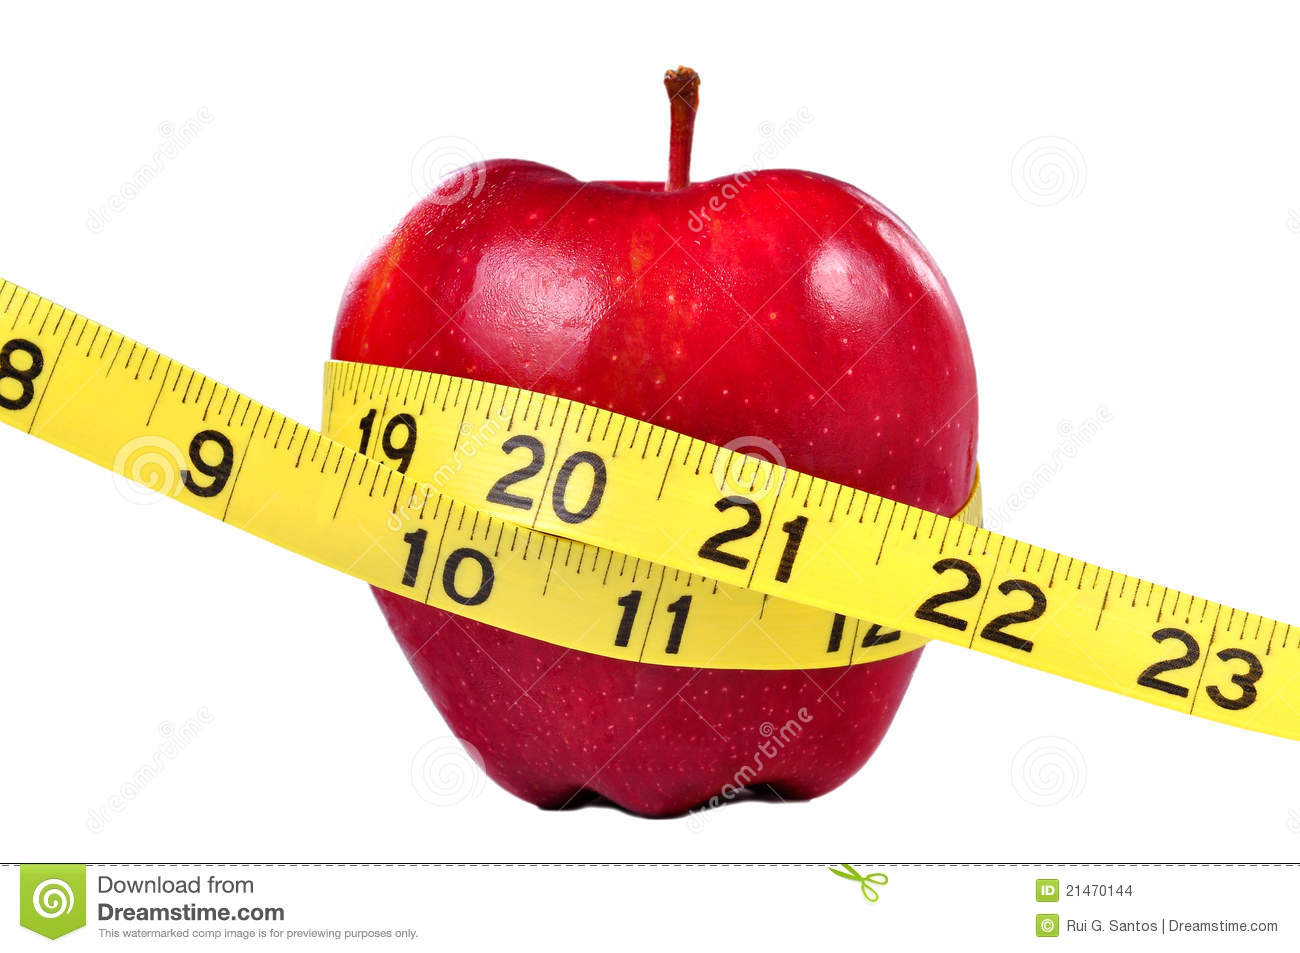     Measuring Tape To Symbolize An Healthy Diet And Body Weight Control